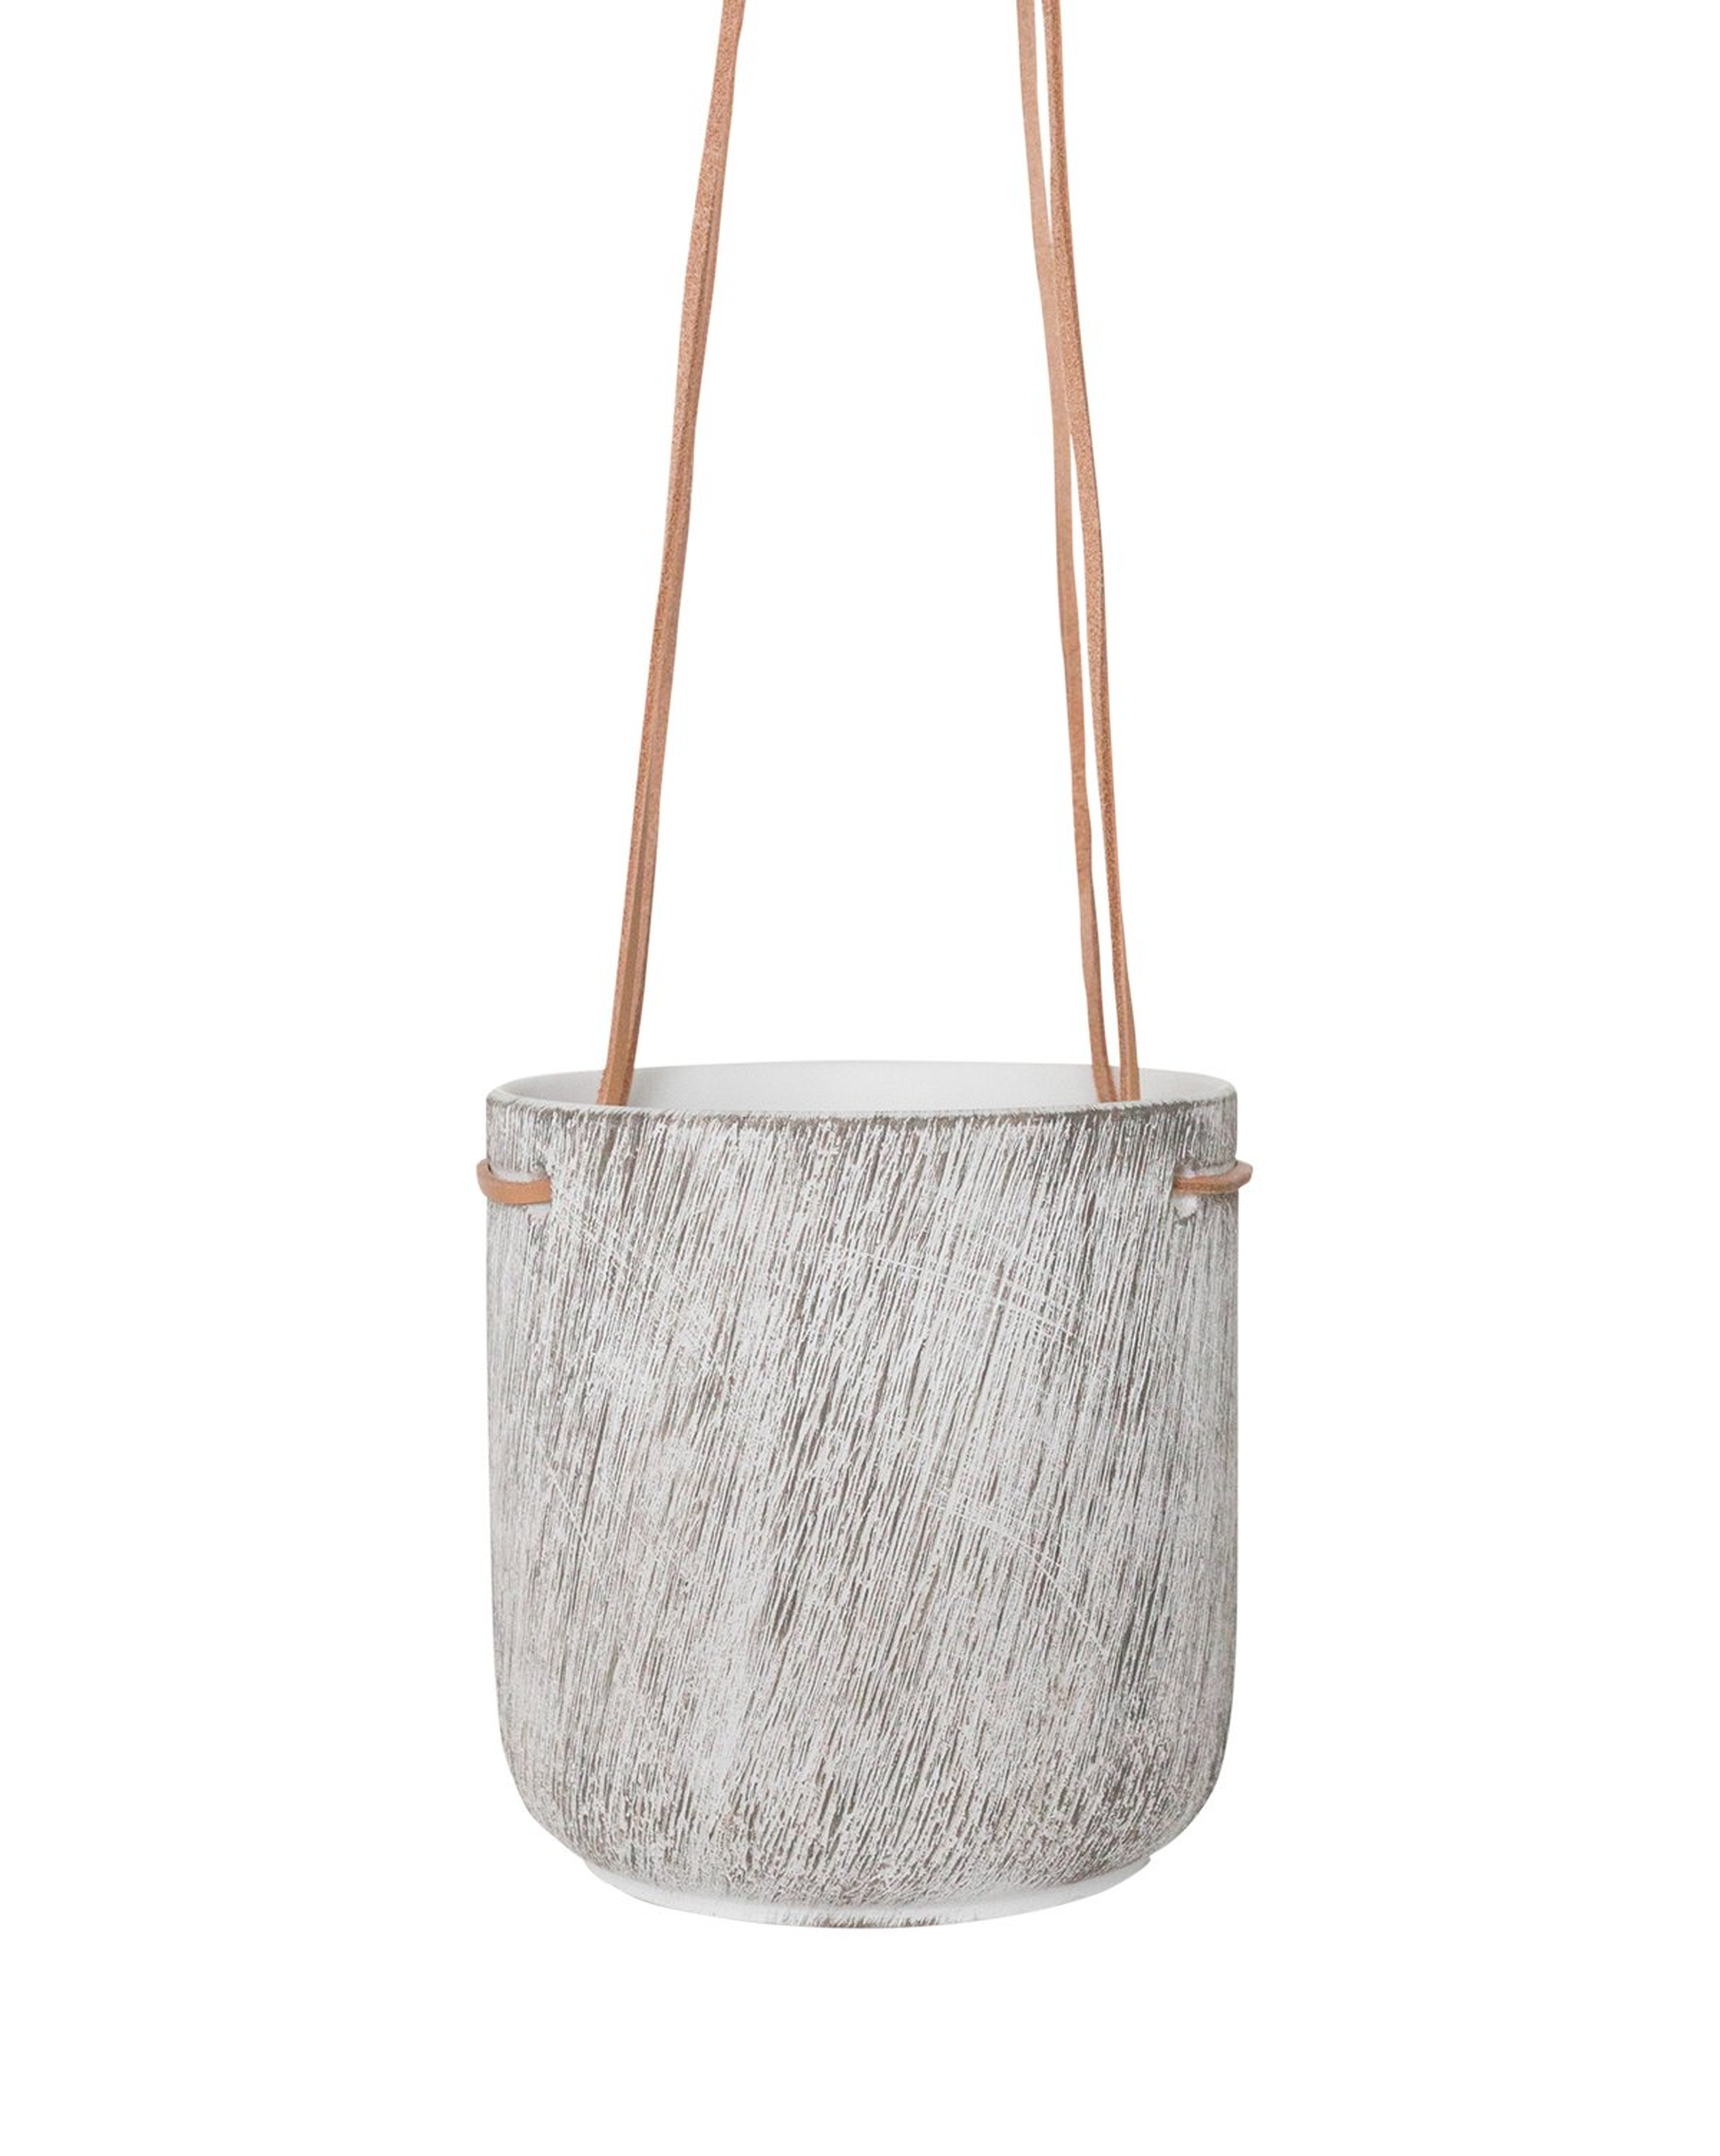 TEXTURED HANGING POT - SMALL - McGee & Co.